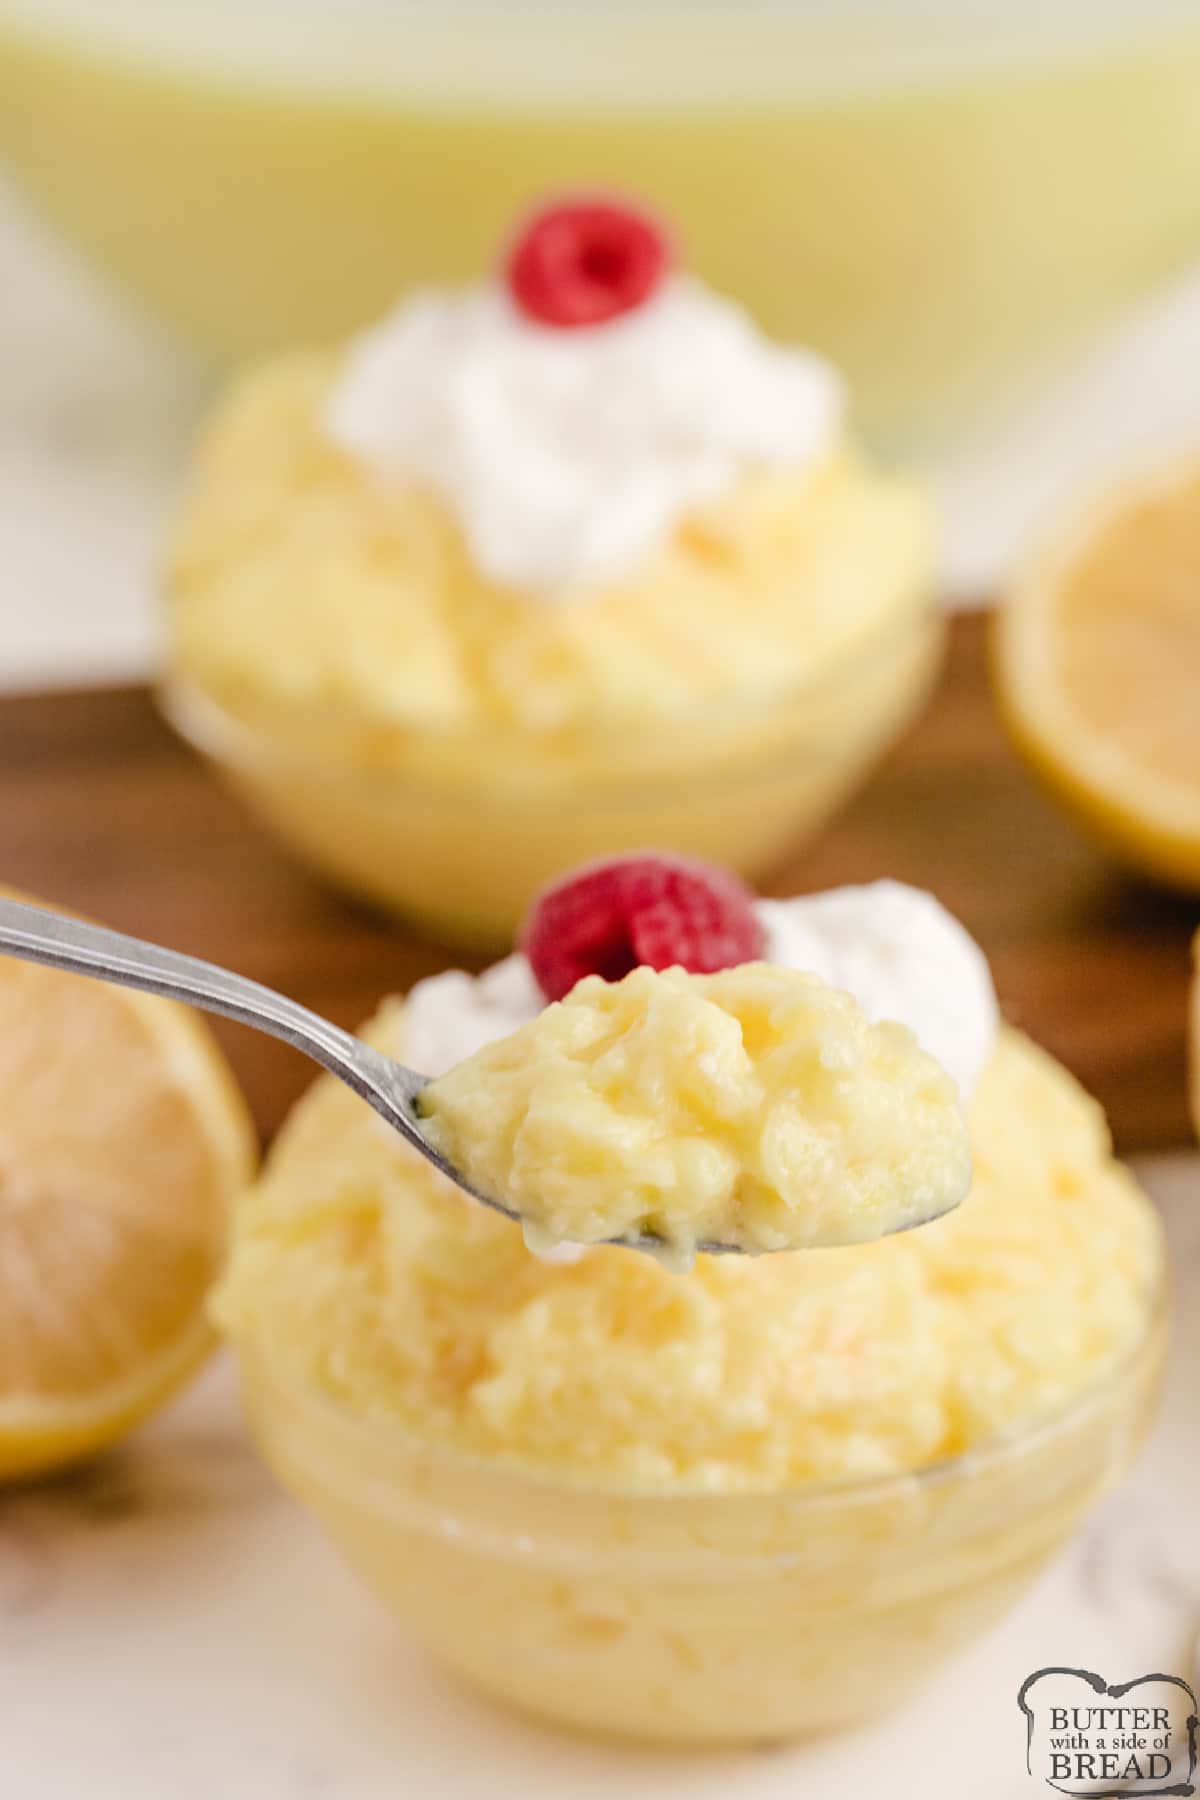 Spoonful of lemon jello mixed with lemon pudding and crushed pineapple